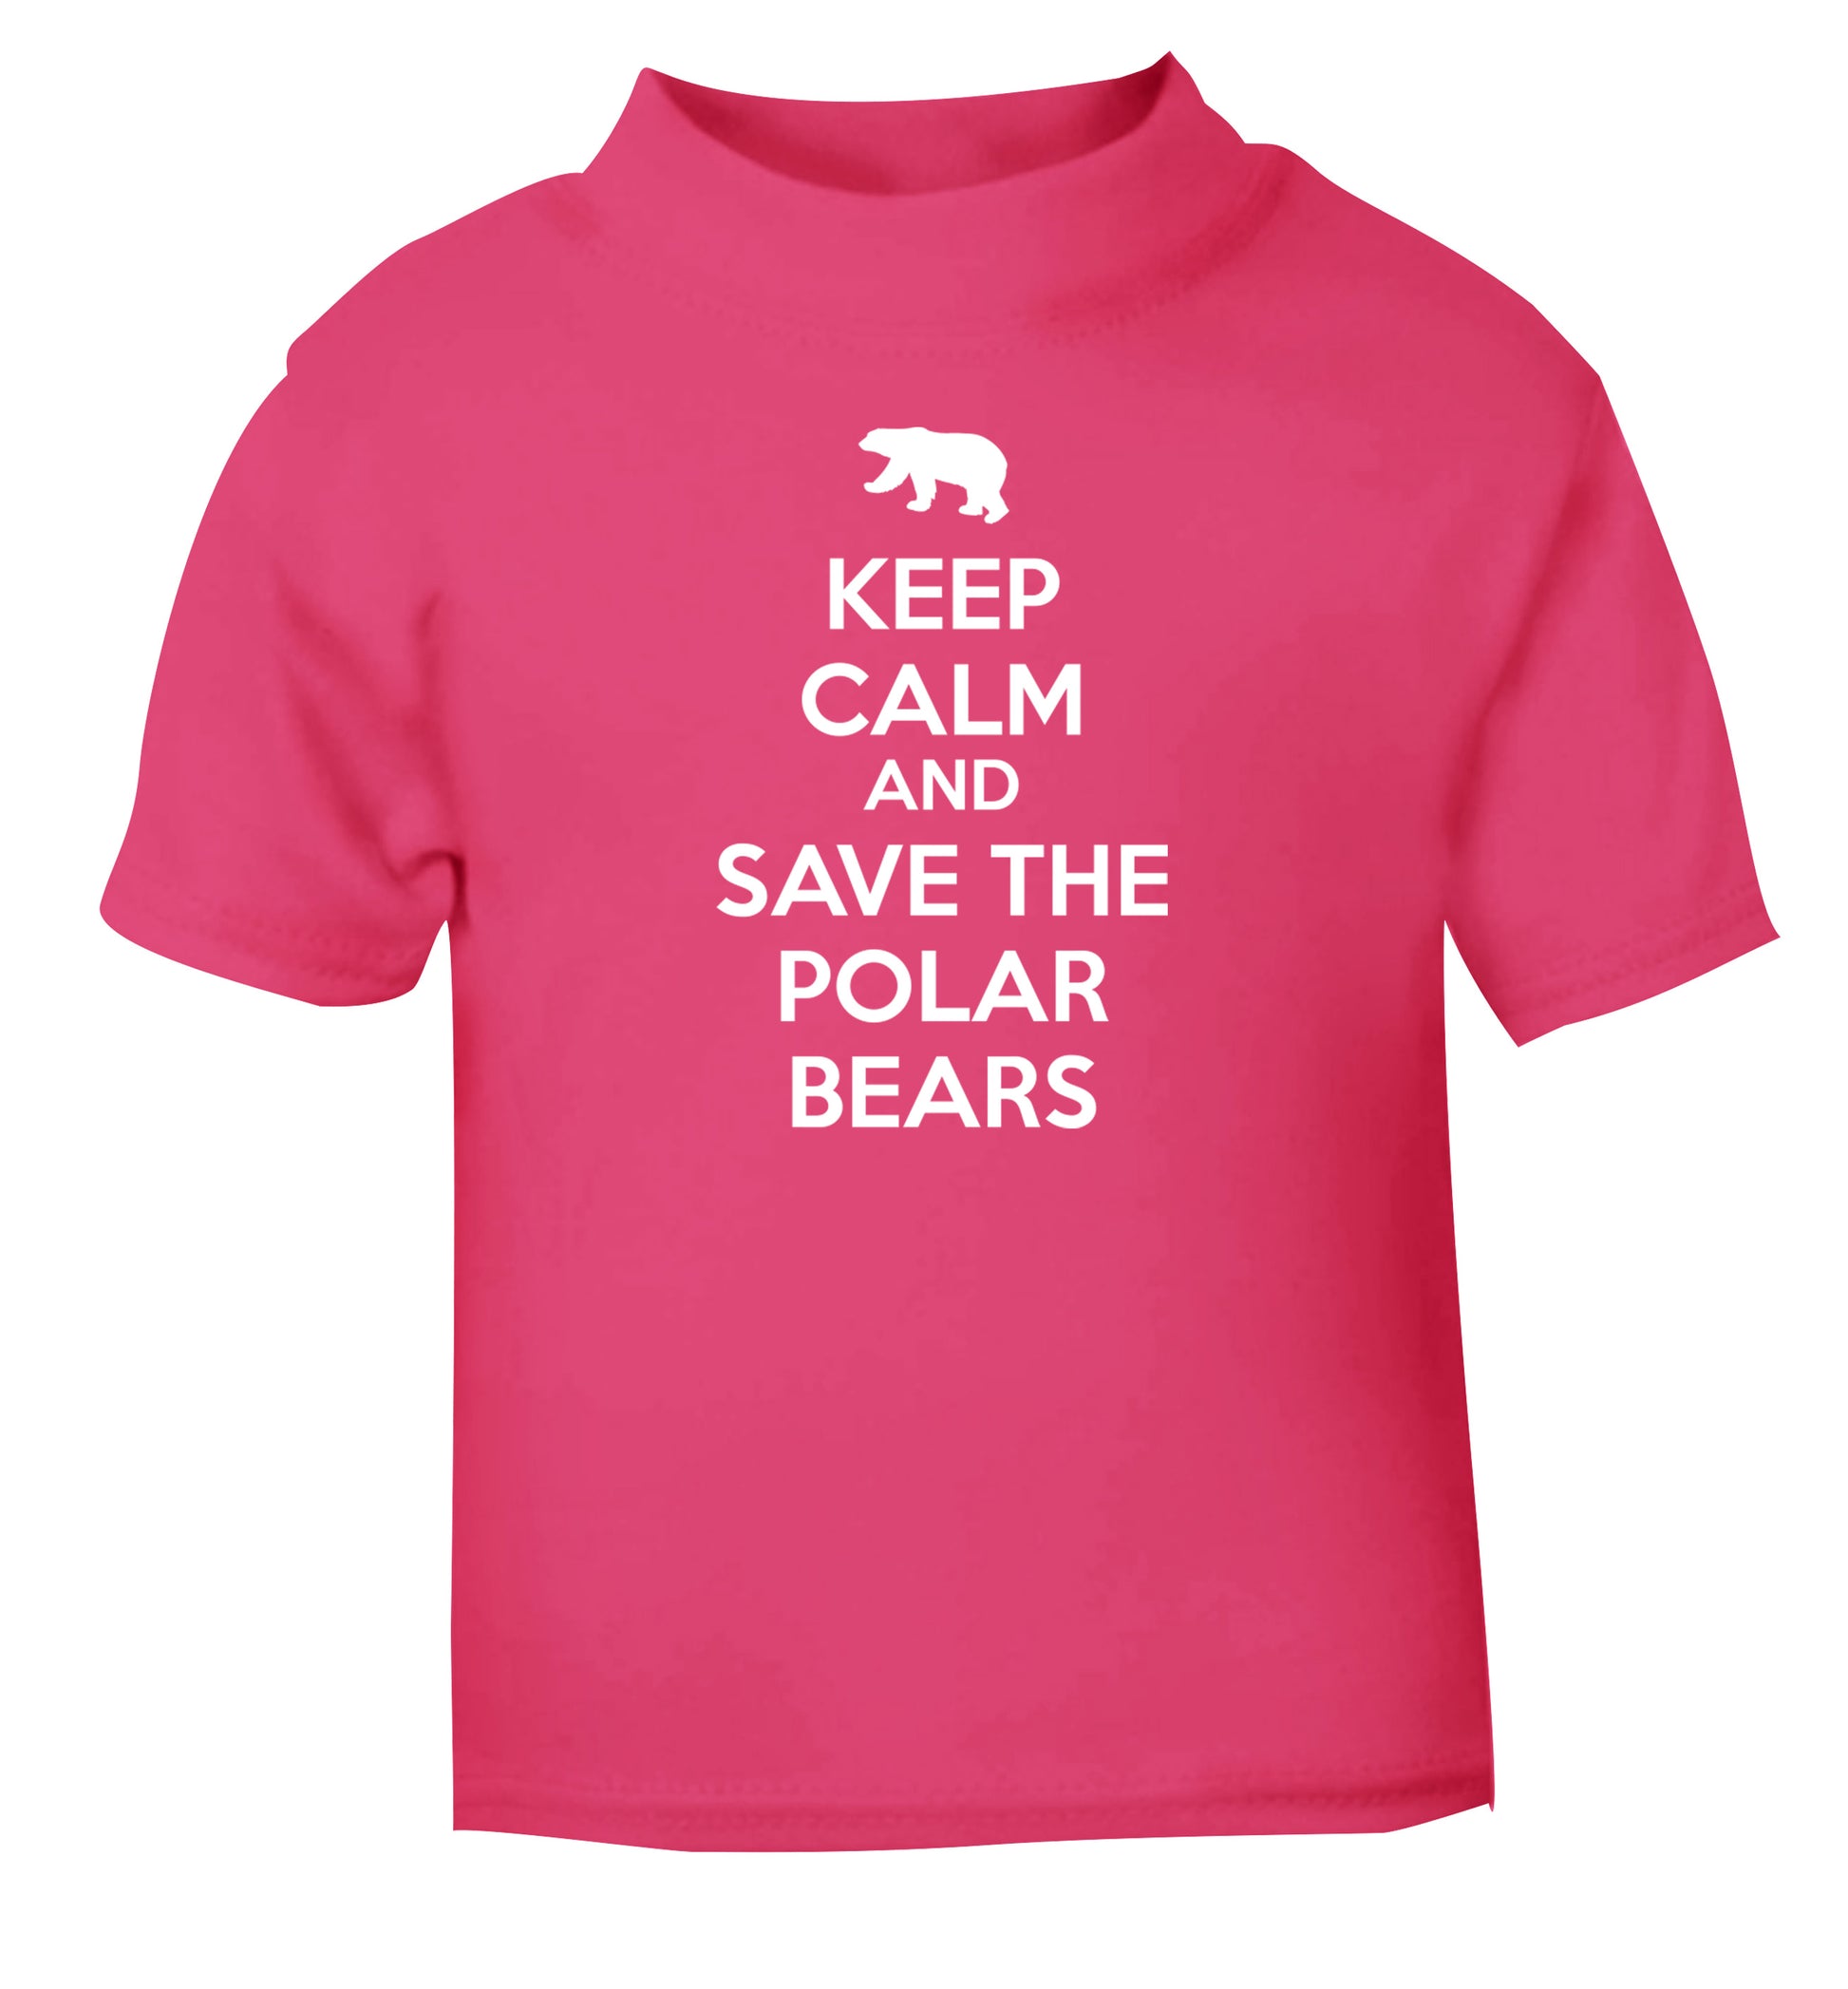 Keep calm and save the polar bears pink Baby Toddler Tshirt 2 Years